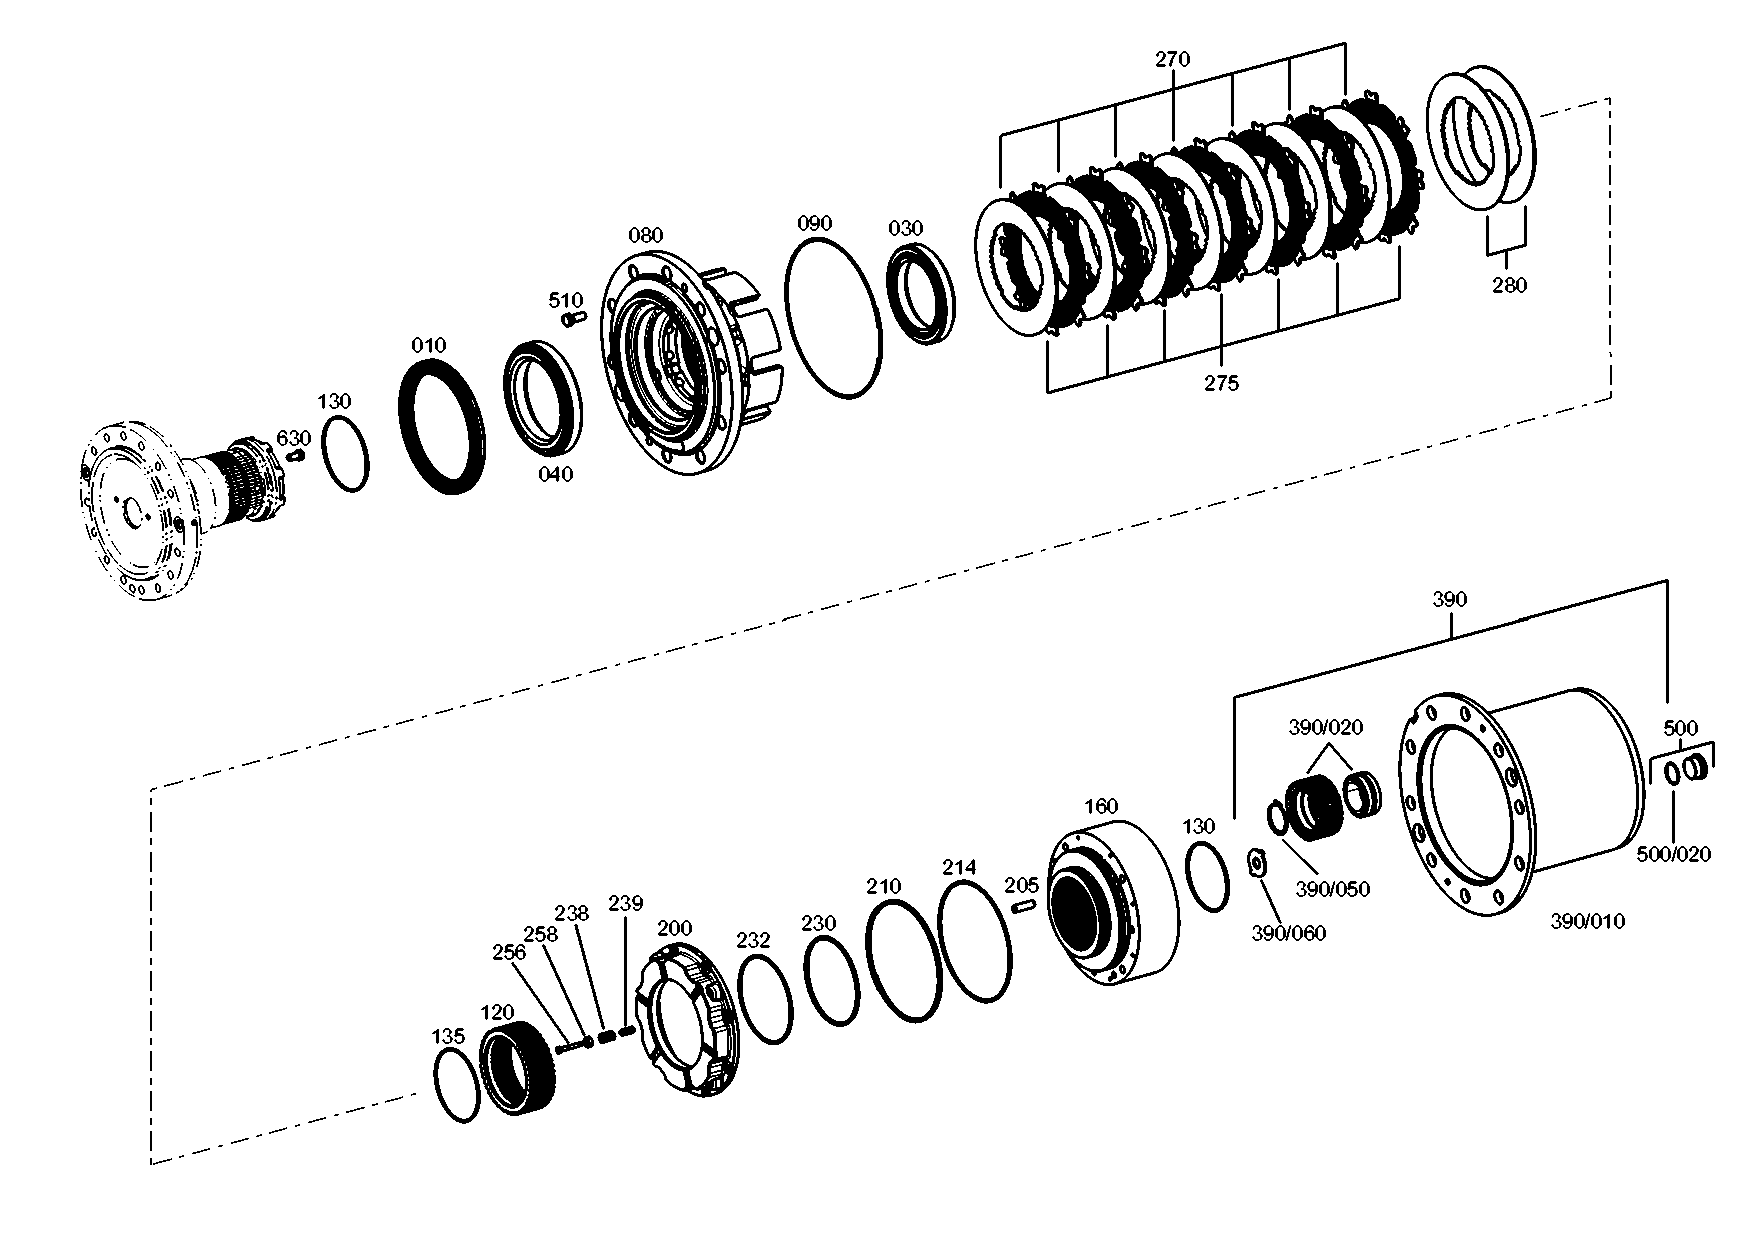 drawing for TEREX EQUIPMENT LIMITED ZGAQ-00100 - CASSETTE RING (figure 4)